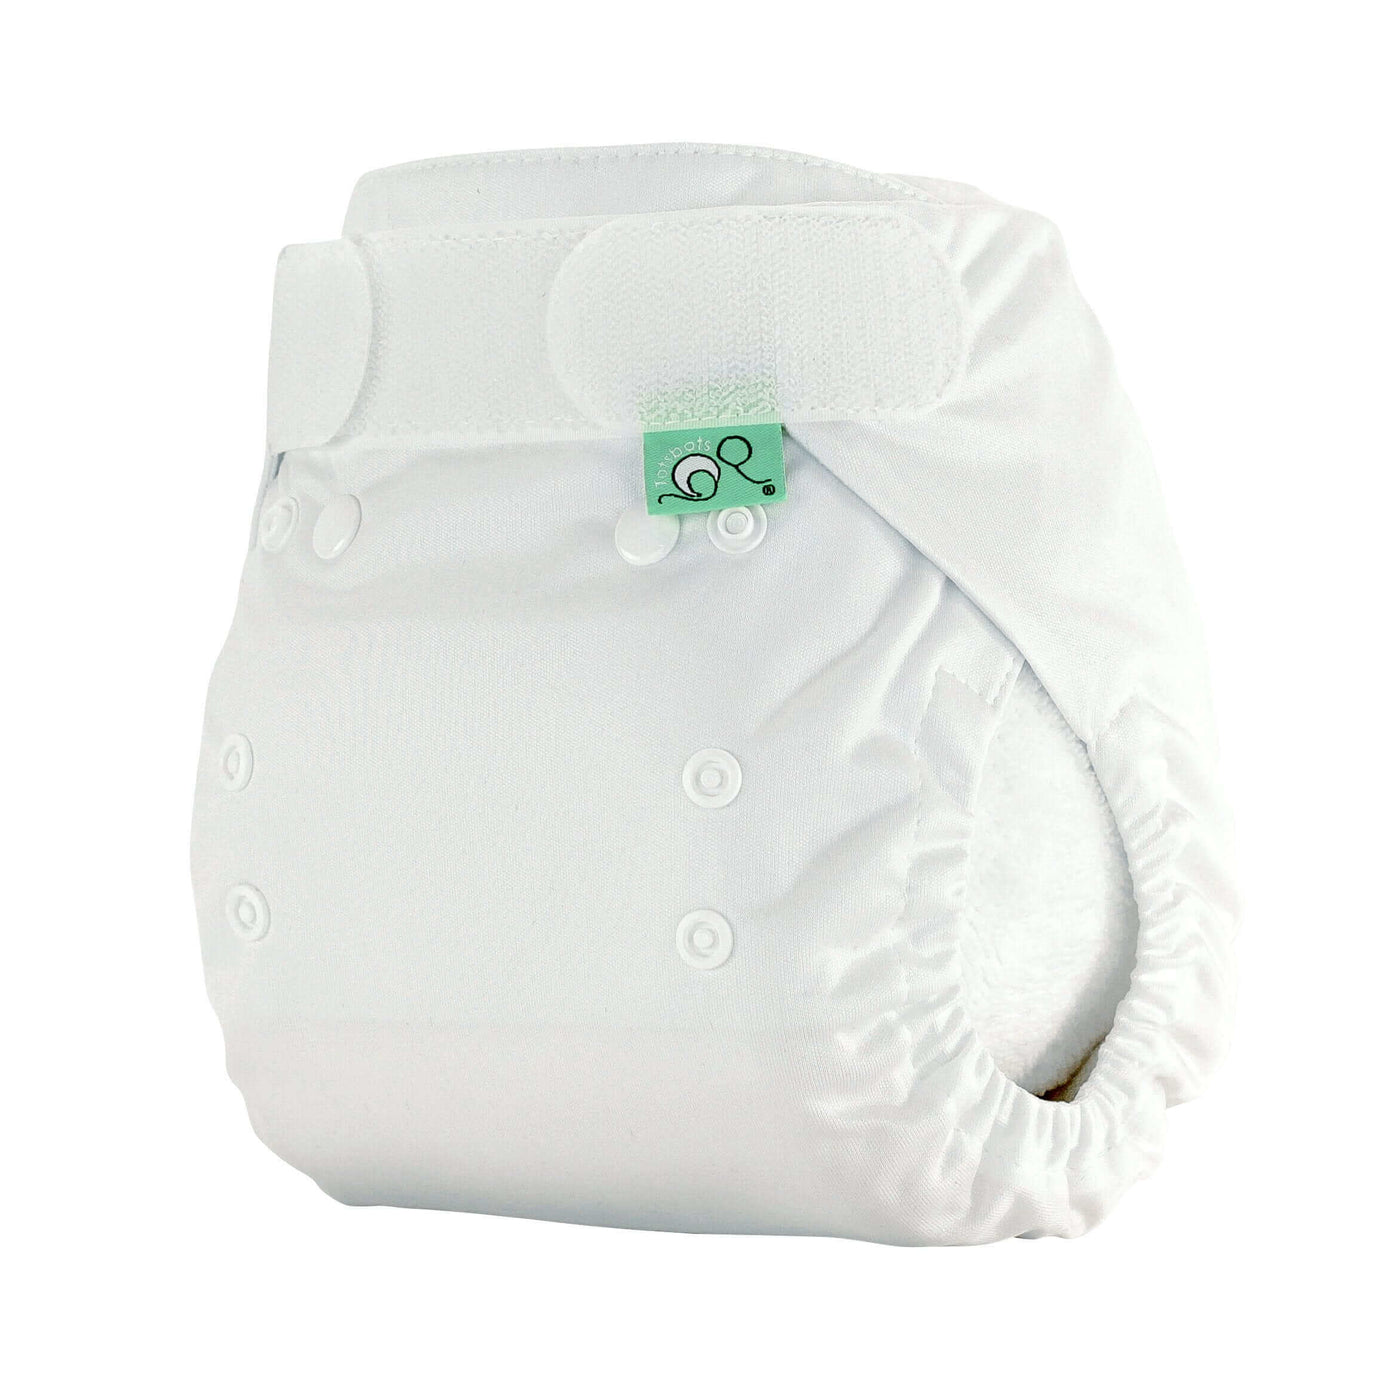 Tots Bots Bamboozle Nappy Wrap Colour: White Size: Size 2 (9-35lbs) reusable nappies Earthlets